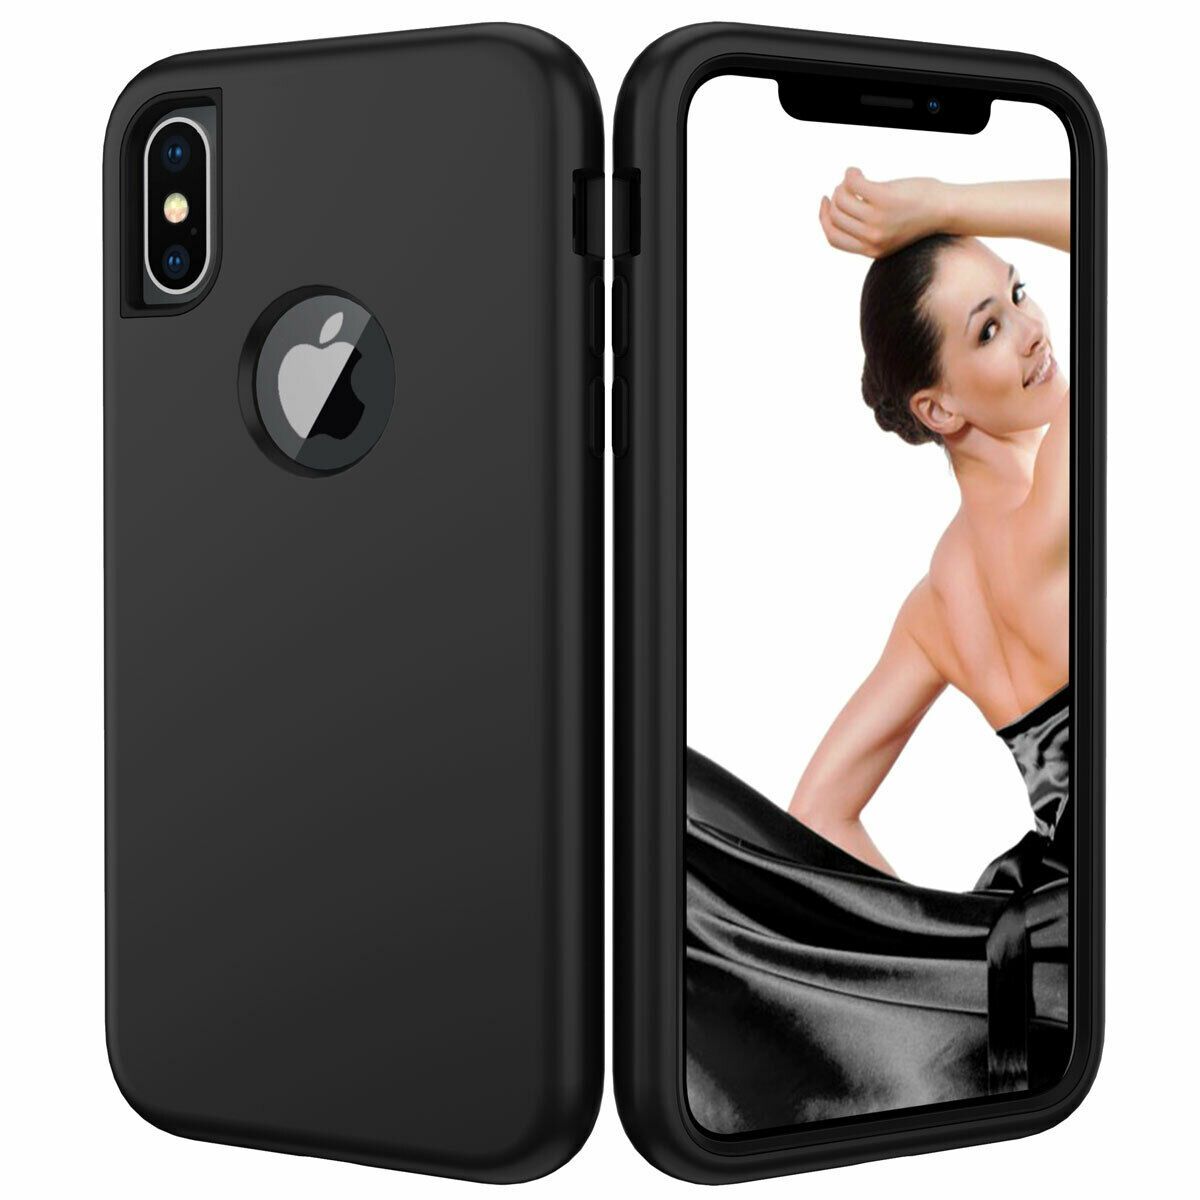 Case For iPhone X Xr XS Max 6 7 8 Plus Shockproof 360 Full Body Cover Protective detsarah Black For iPhone Xs Max 